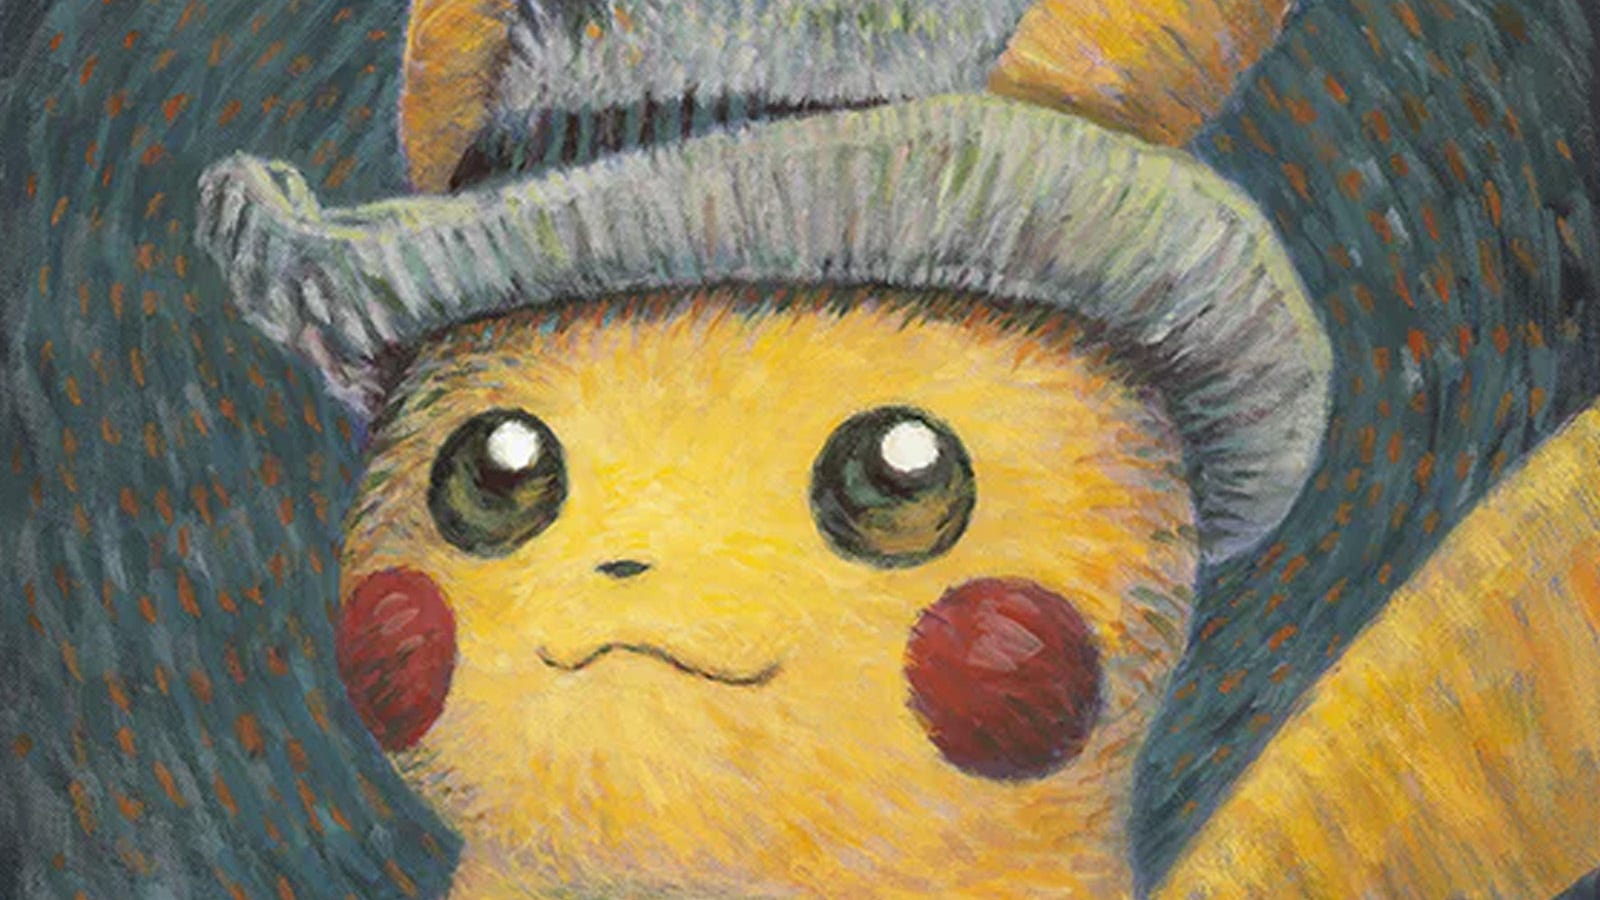 The Van Gogh Museum will not restock that Pokémon card amid safety concerns thumbnail